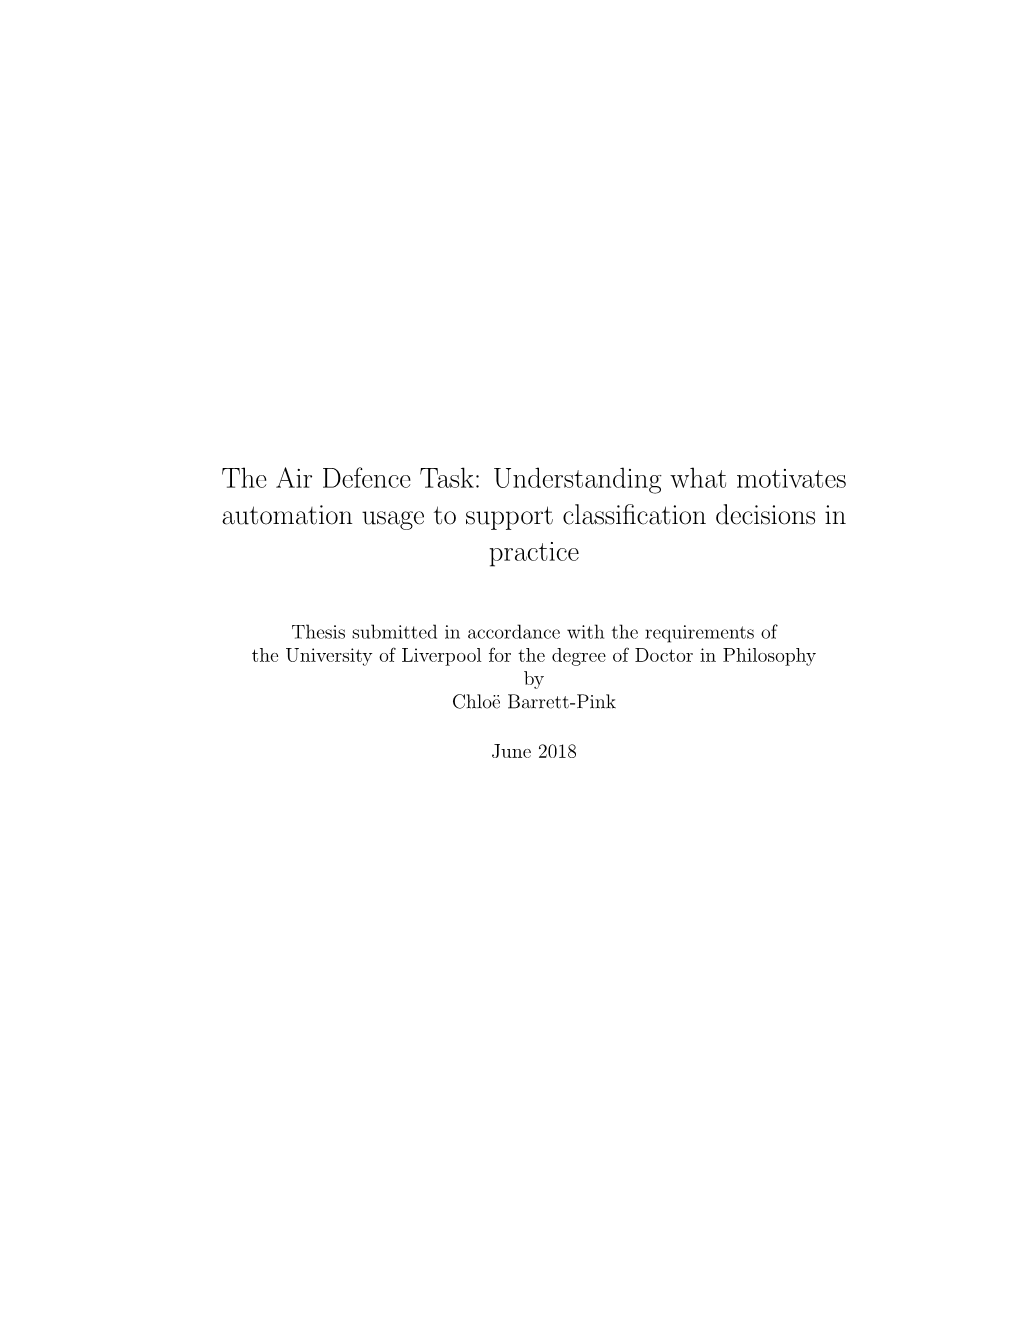 The Air Defence Task: Understanding What Motivates Automation Usage to Support Classiﬁcation Decisions in Practice